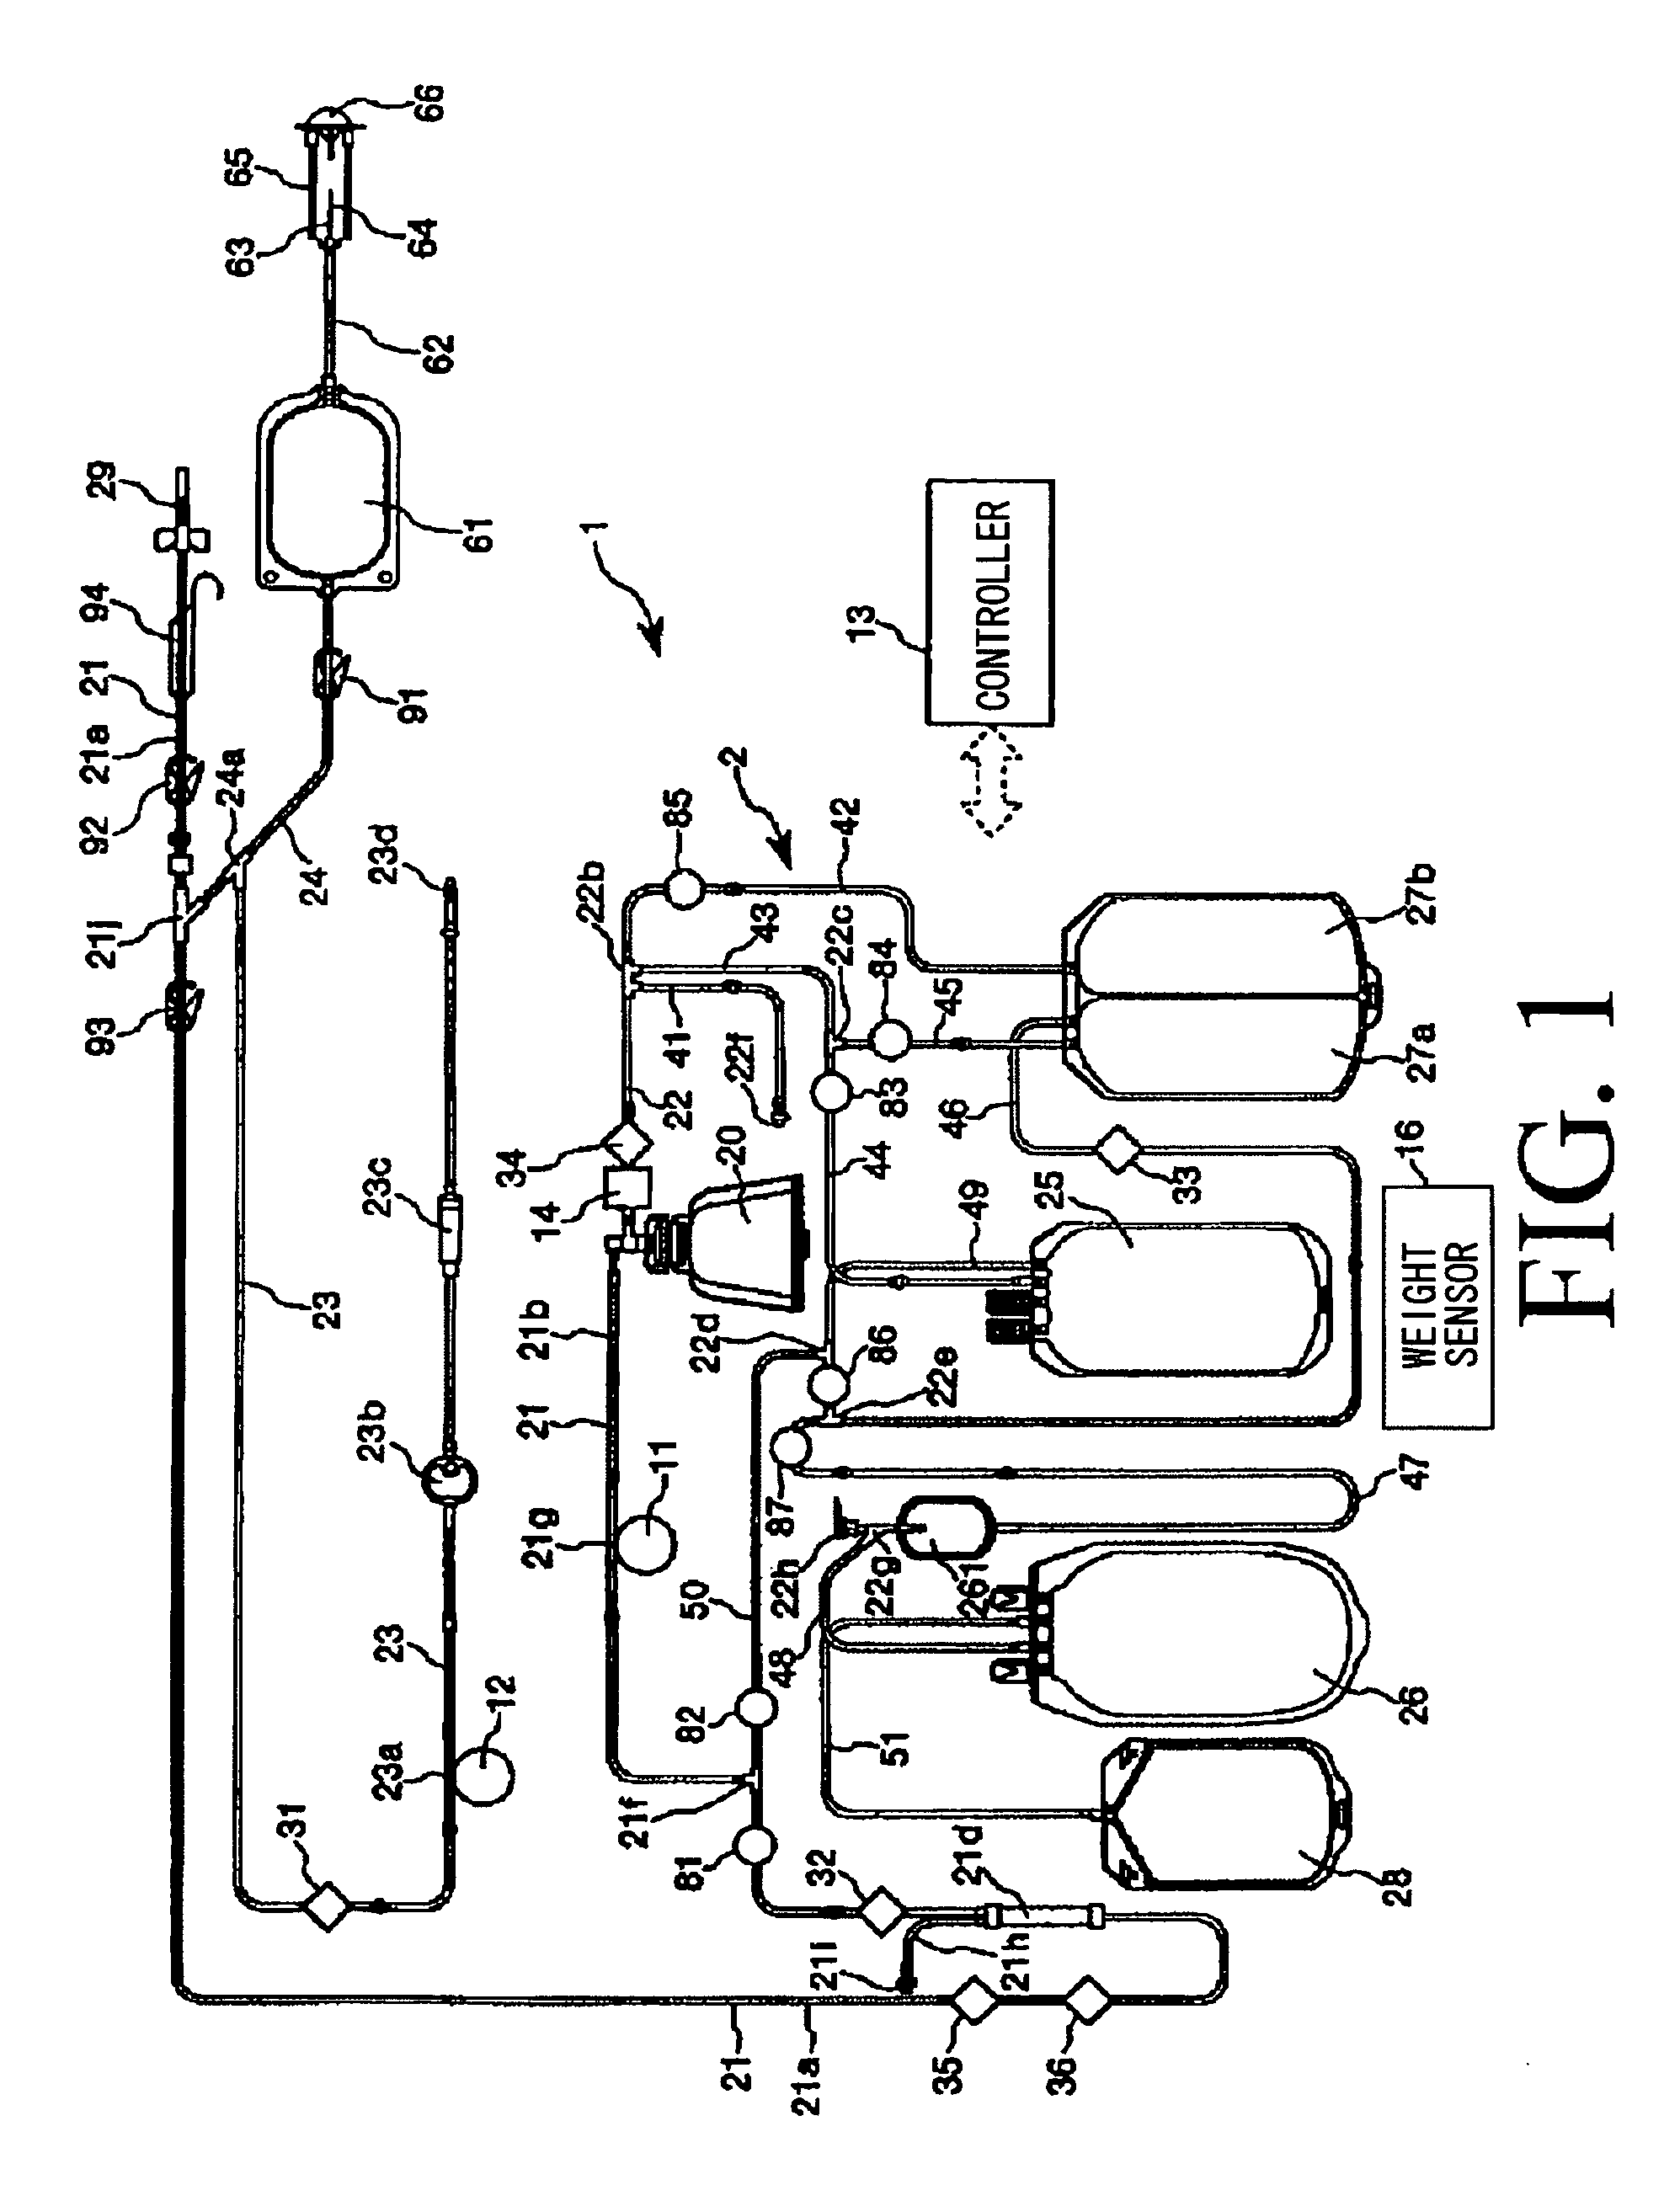 Circuit for collecting blood component and apparatus for collecting blood component